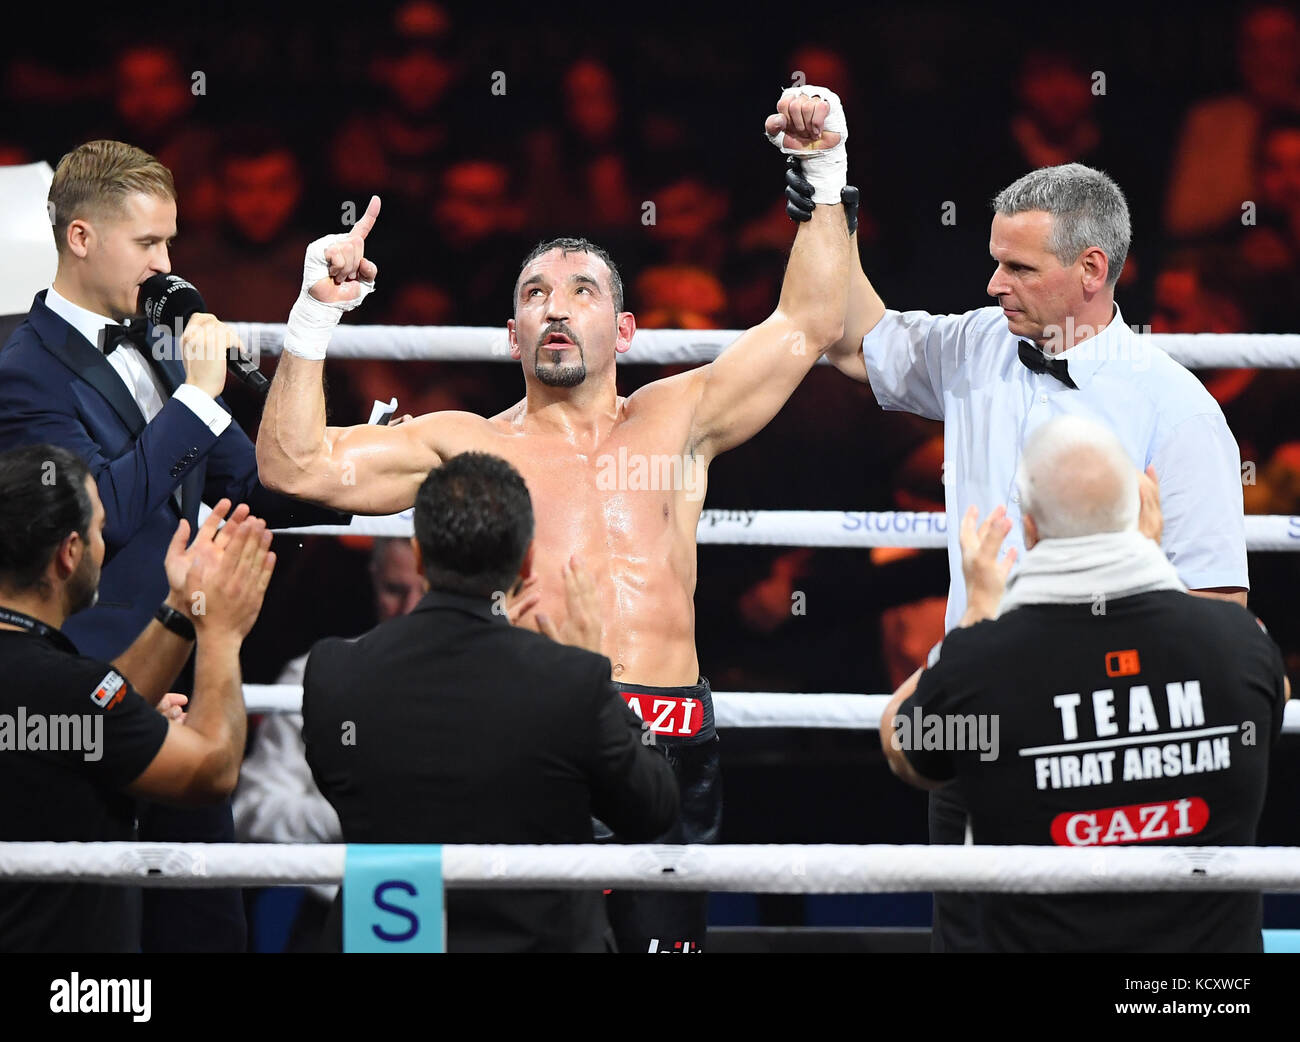 Stuttgart, Germany. 7th Oct, 2017. Firat Arslan celebrates his victory in the professional boxing match between Arslan from Germany and Valori from Argentina in Stuttgart, Germany, 7 October 2017. Credit: Sebastian Gollnow/dpa/Alamy Live News Stock Photo